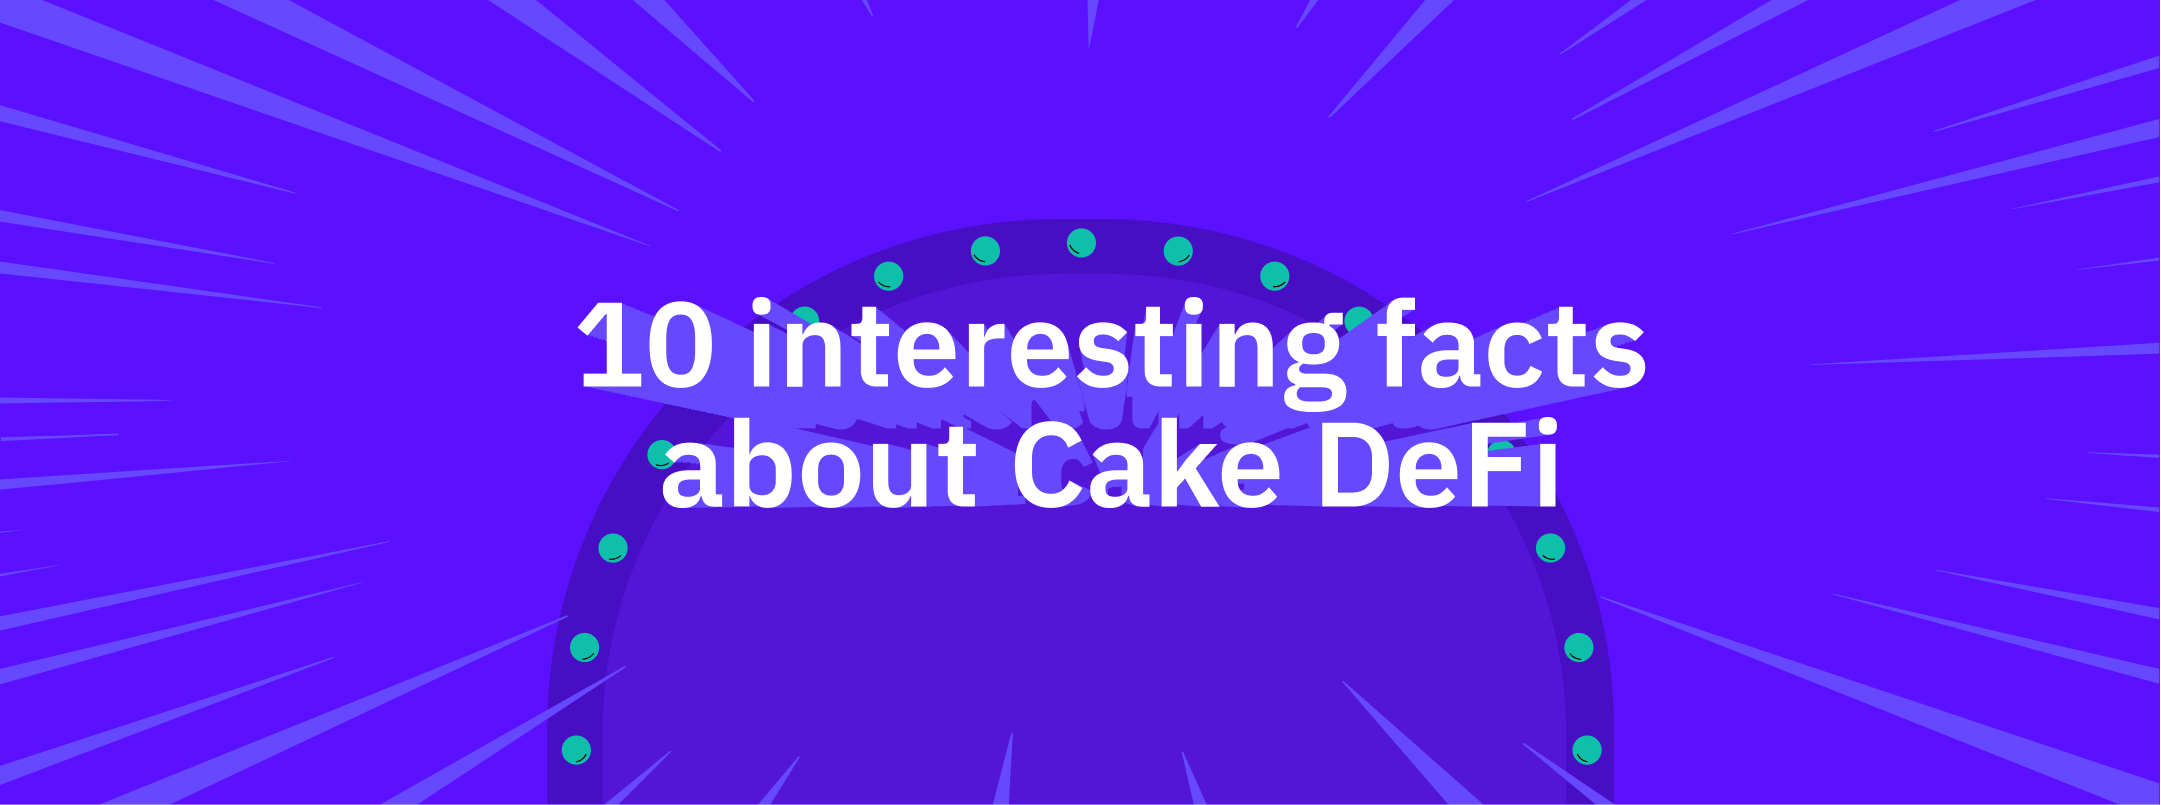 10 interesting facts about Cake DeFi